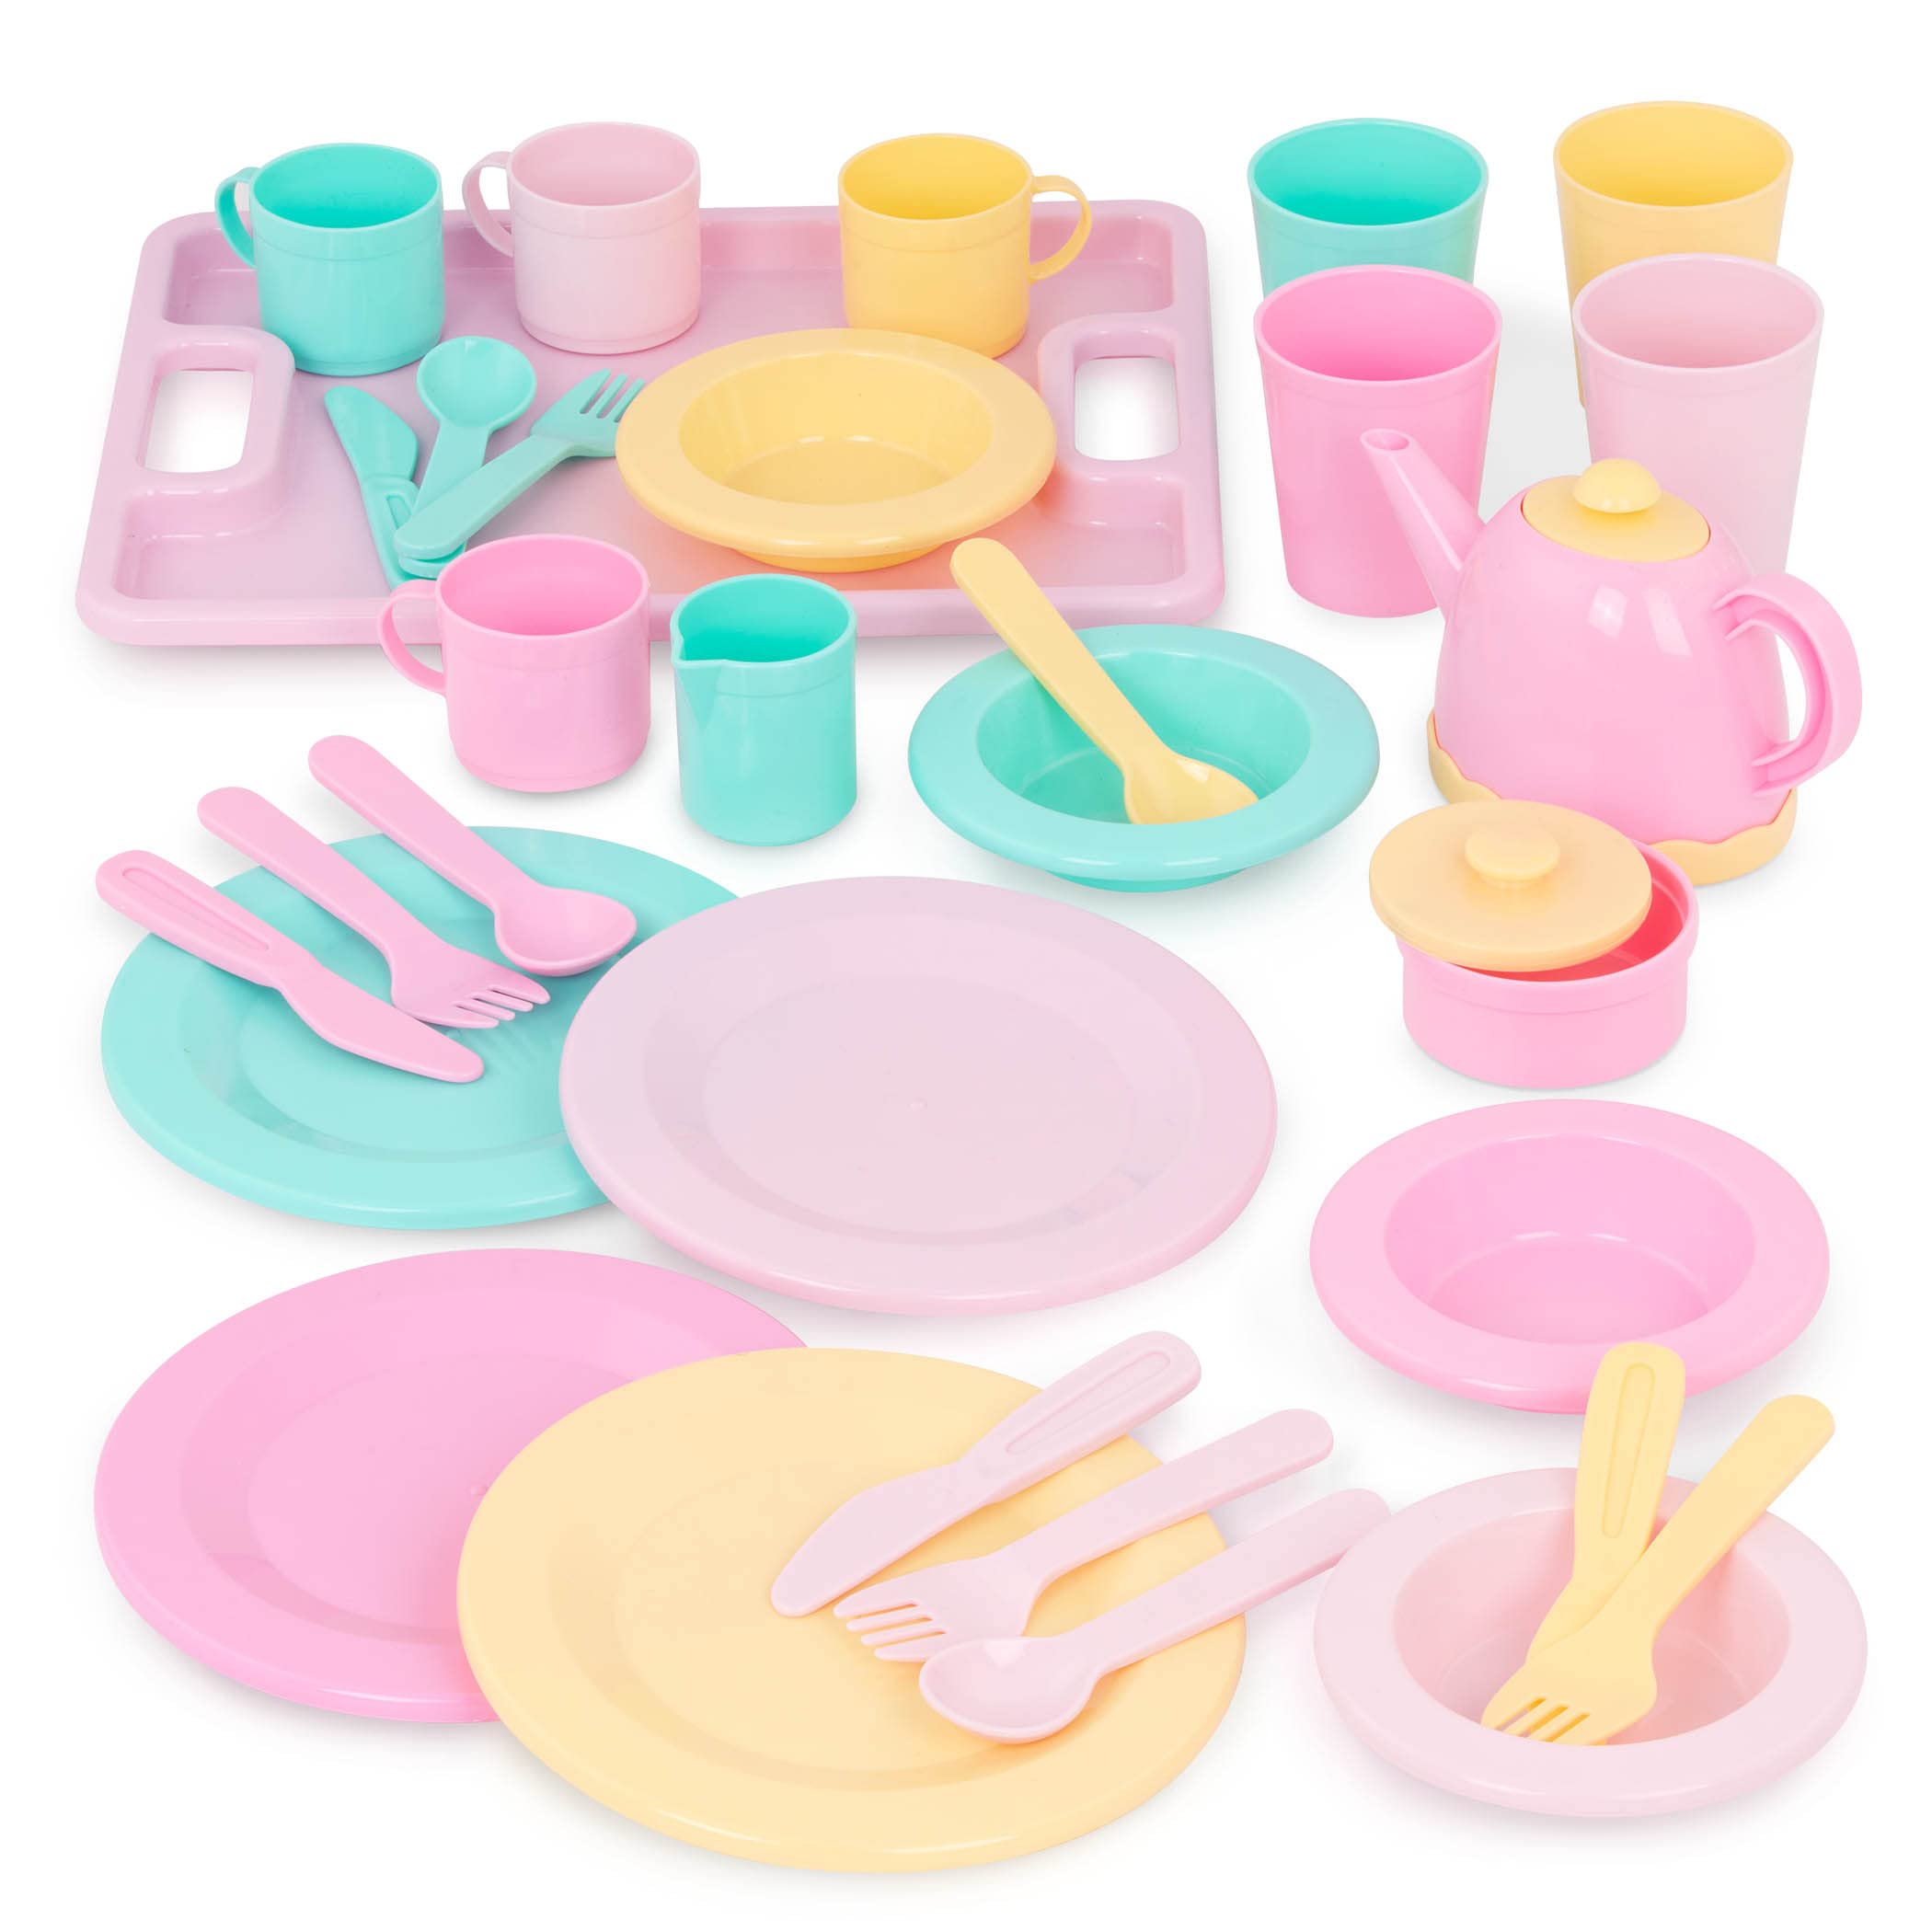 Battat- Play Circle- Dish Set - Plates, Cups, And Tea Party Toys - Play Kitchen For Toddlers- Pretend Play - 3 years +